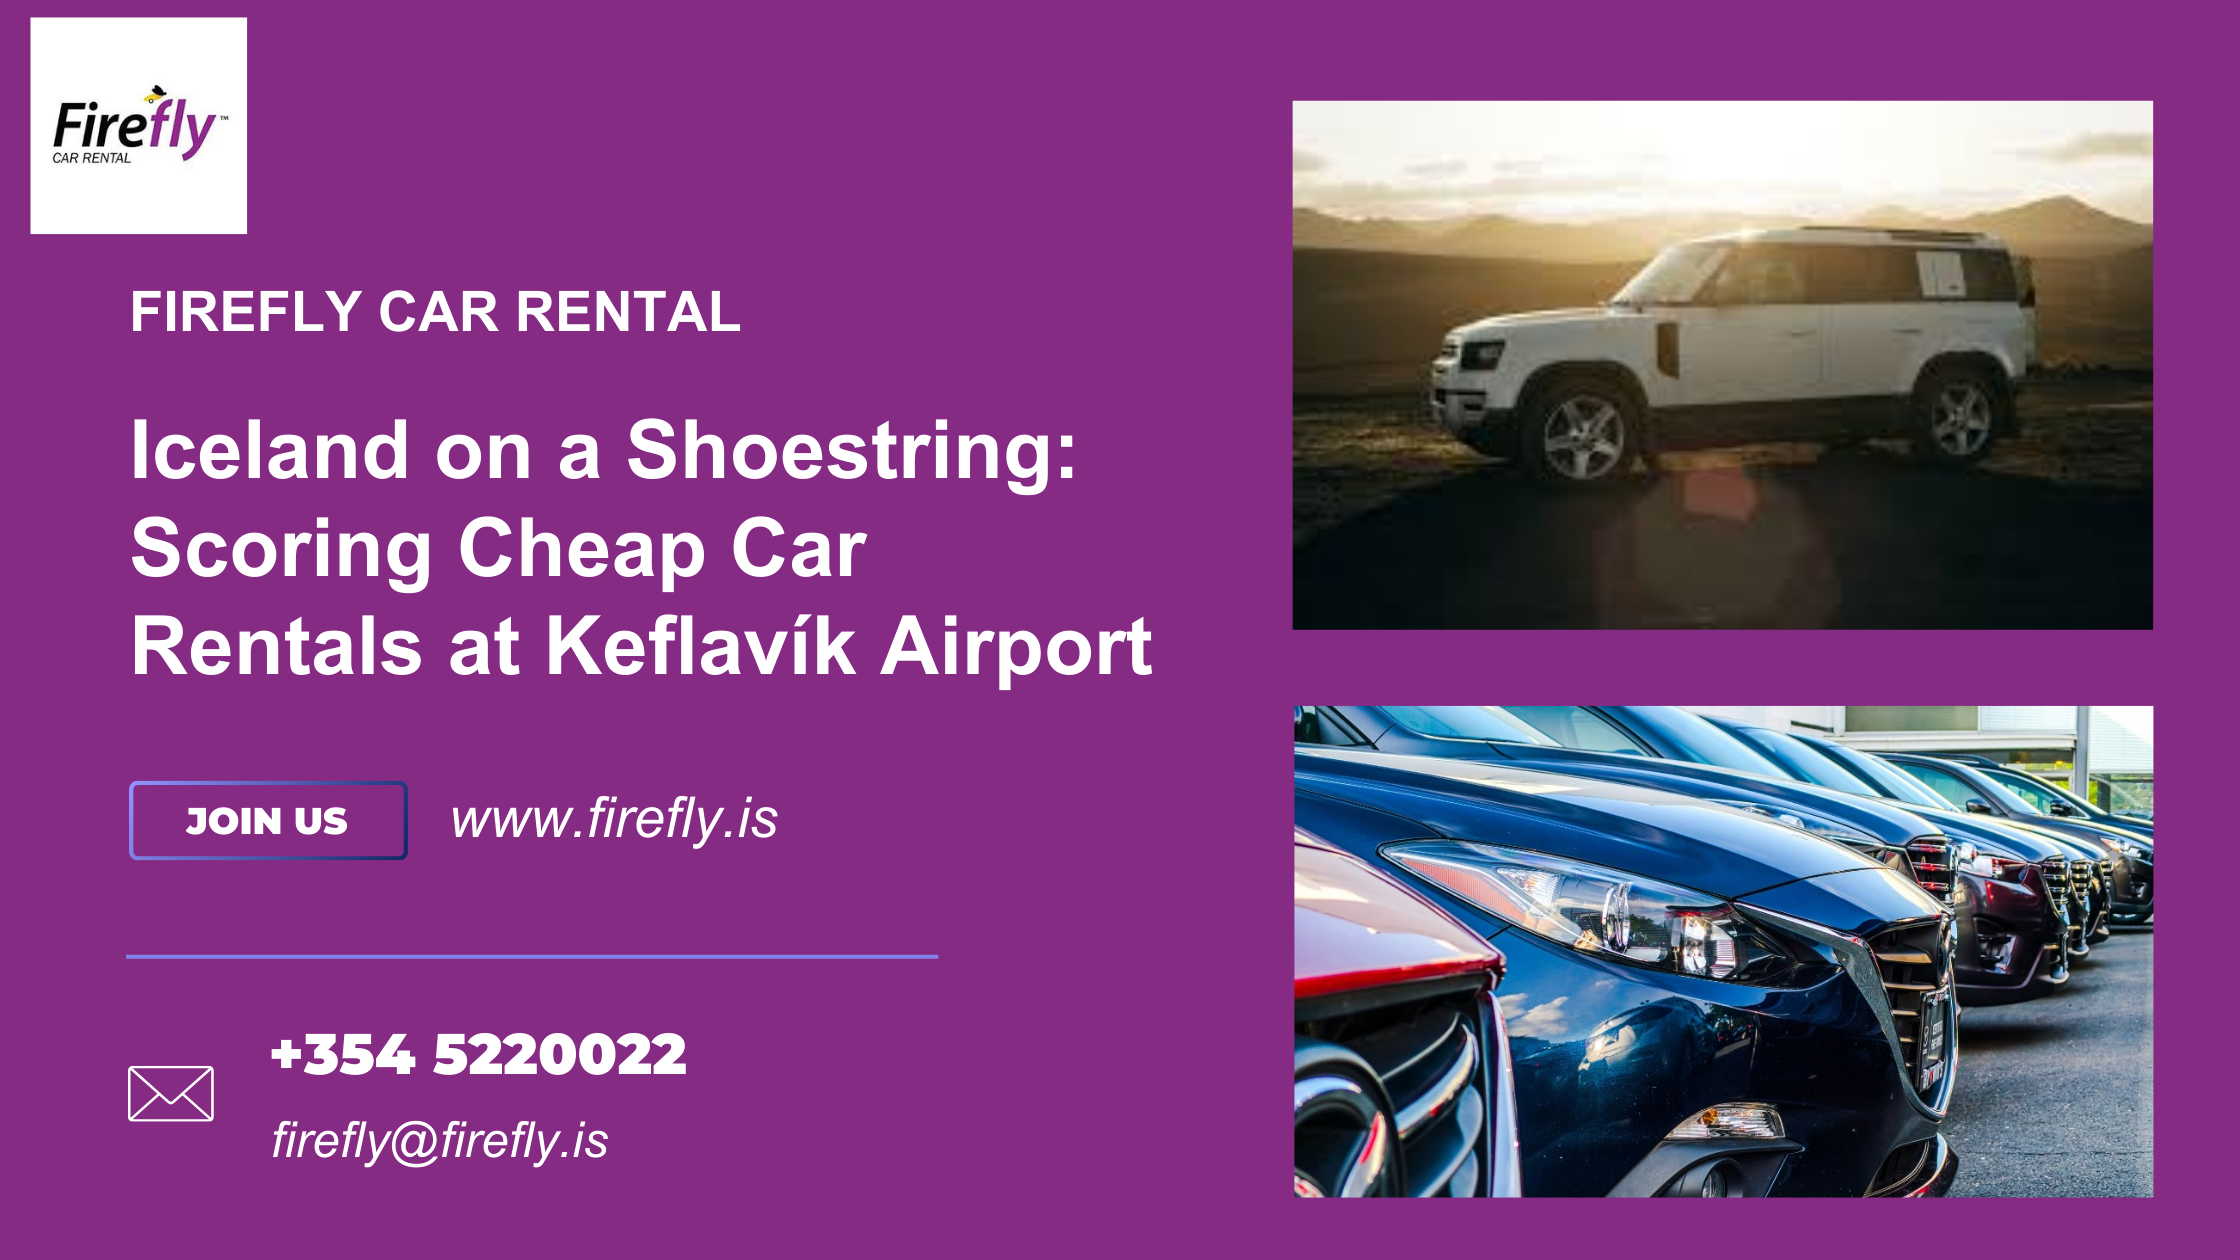 Iceland on a Shoestring: Scoring Cheap Car Rentals at Keflavík Airport – Firefly Car Rental Iceland